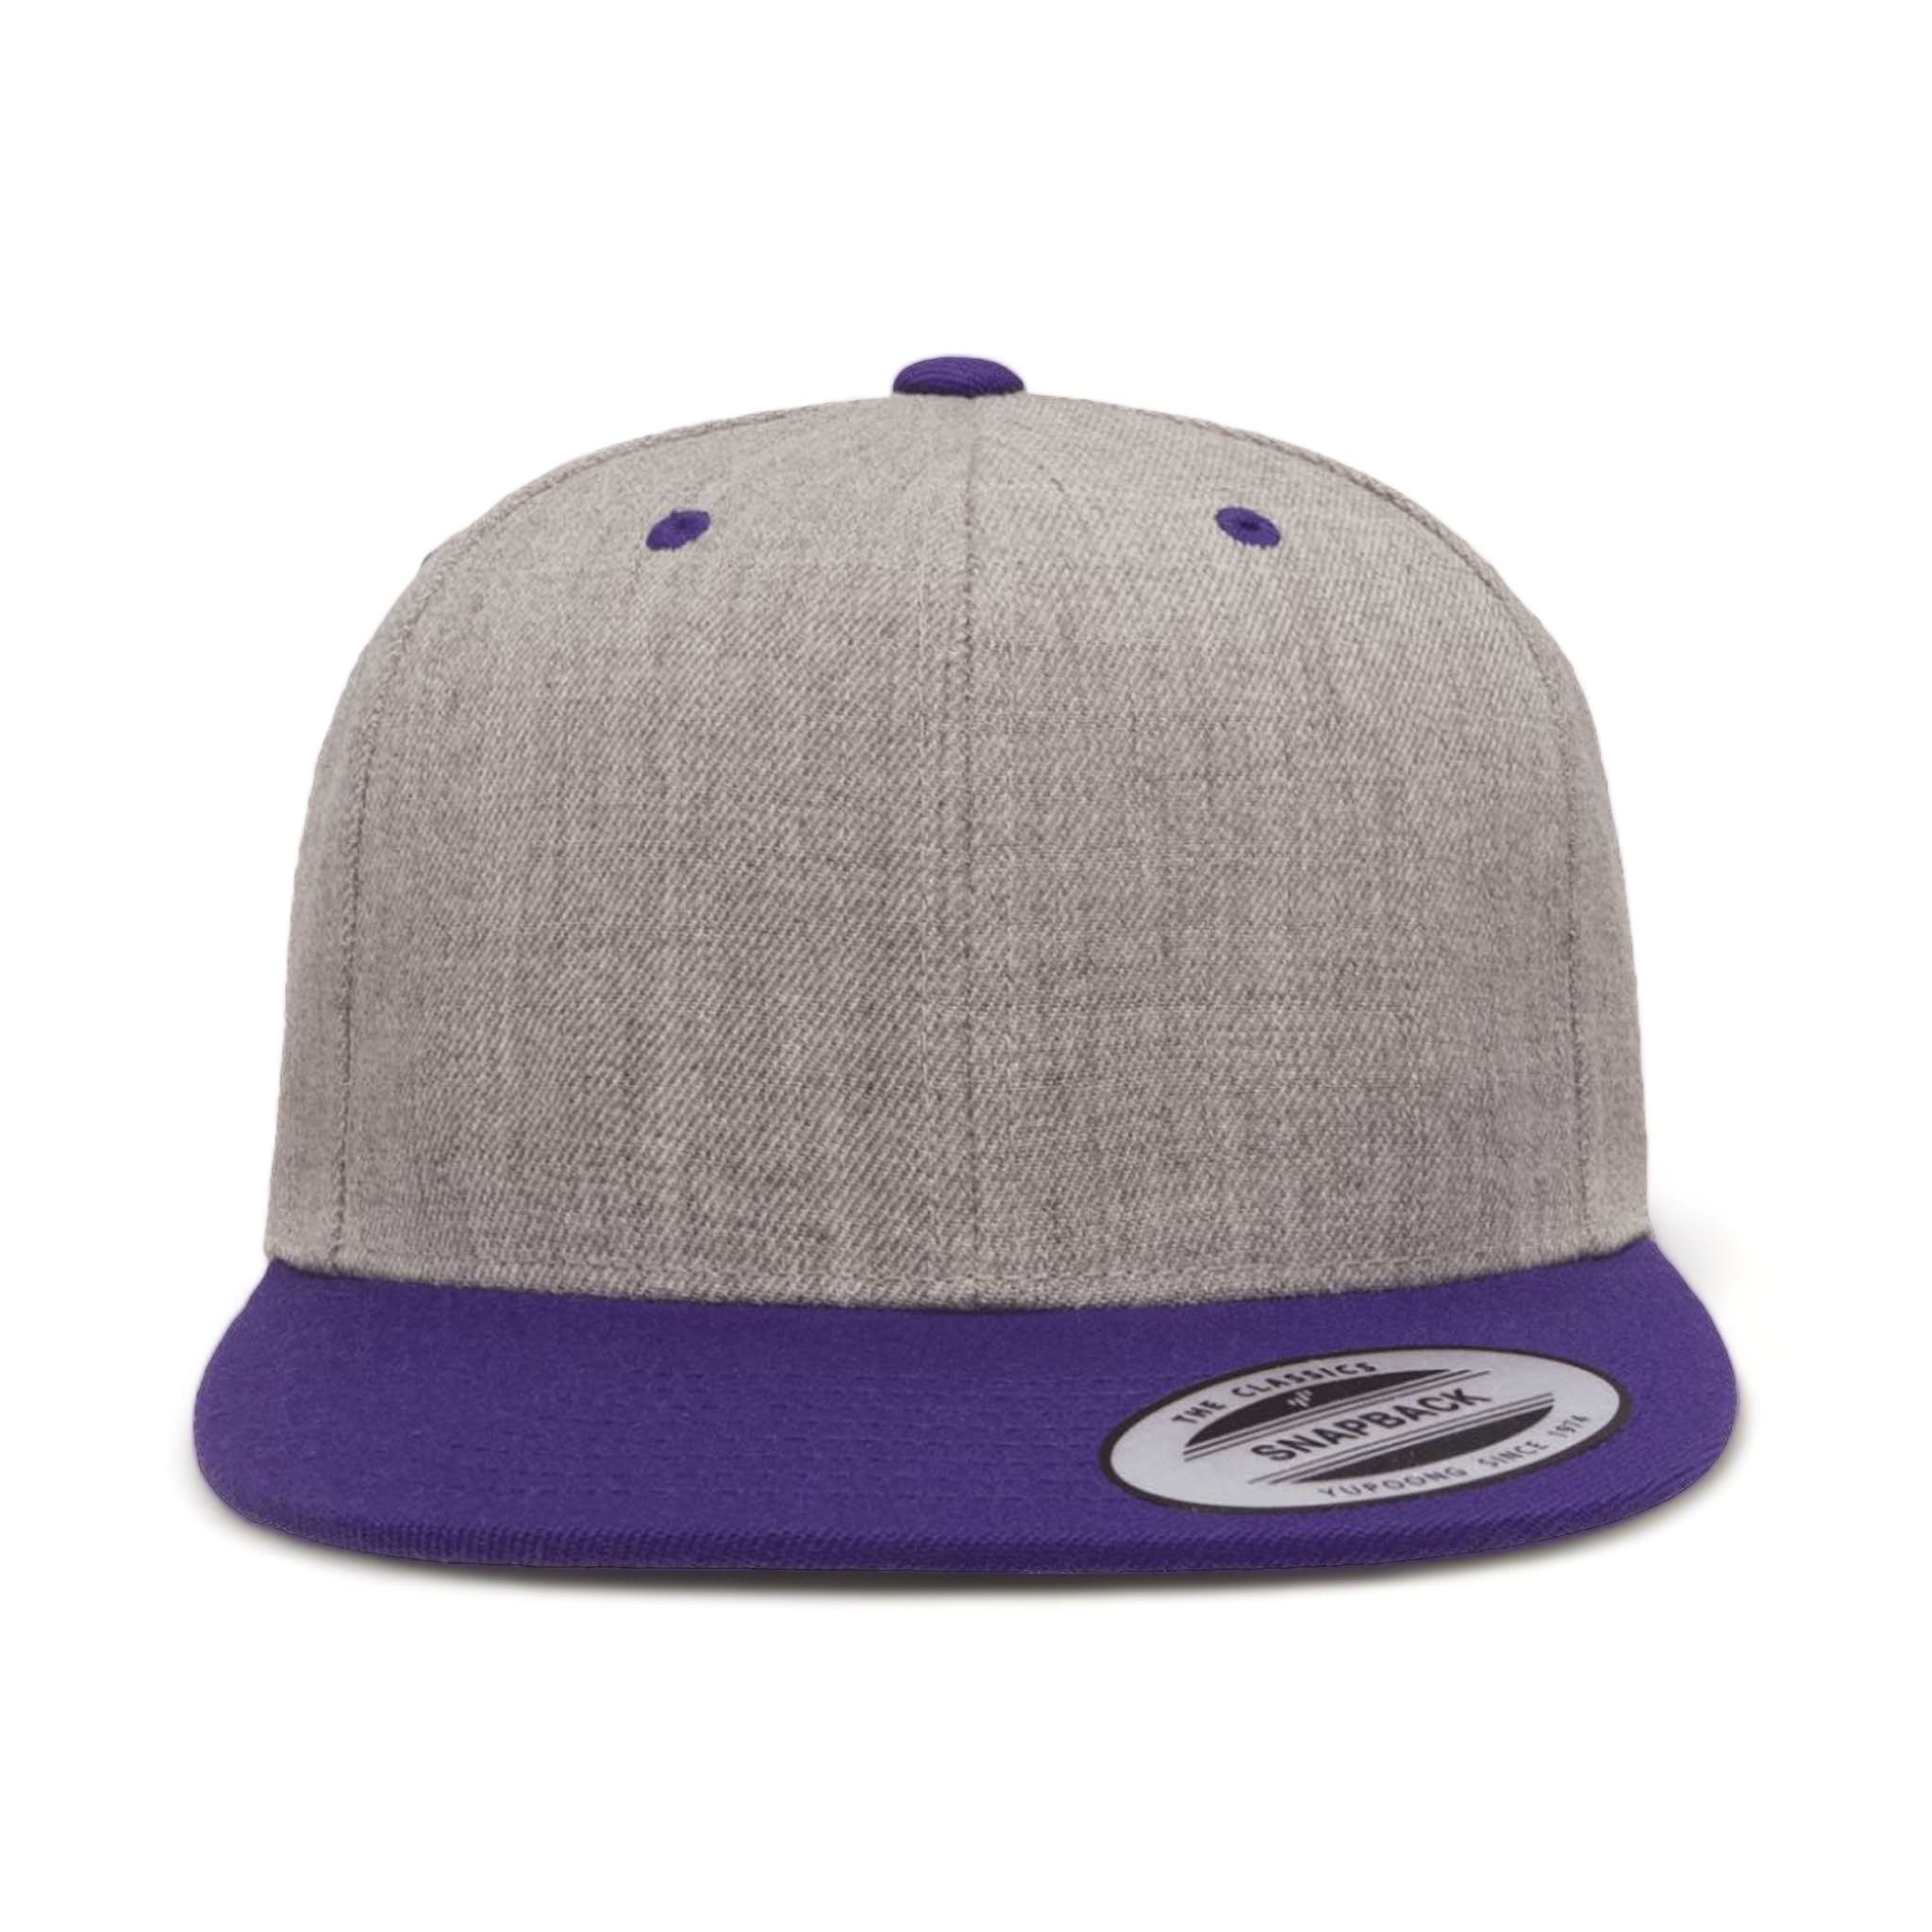 Front view of YP Classics 6089M custom hat in heather grey and purple